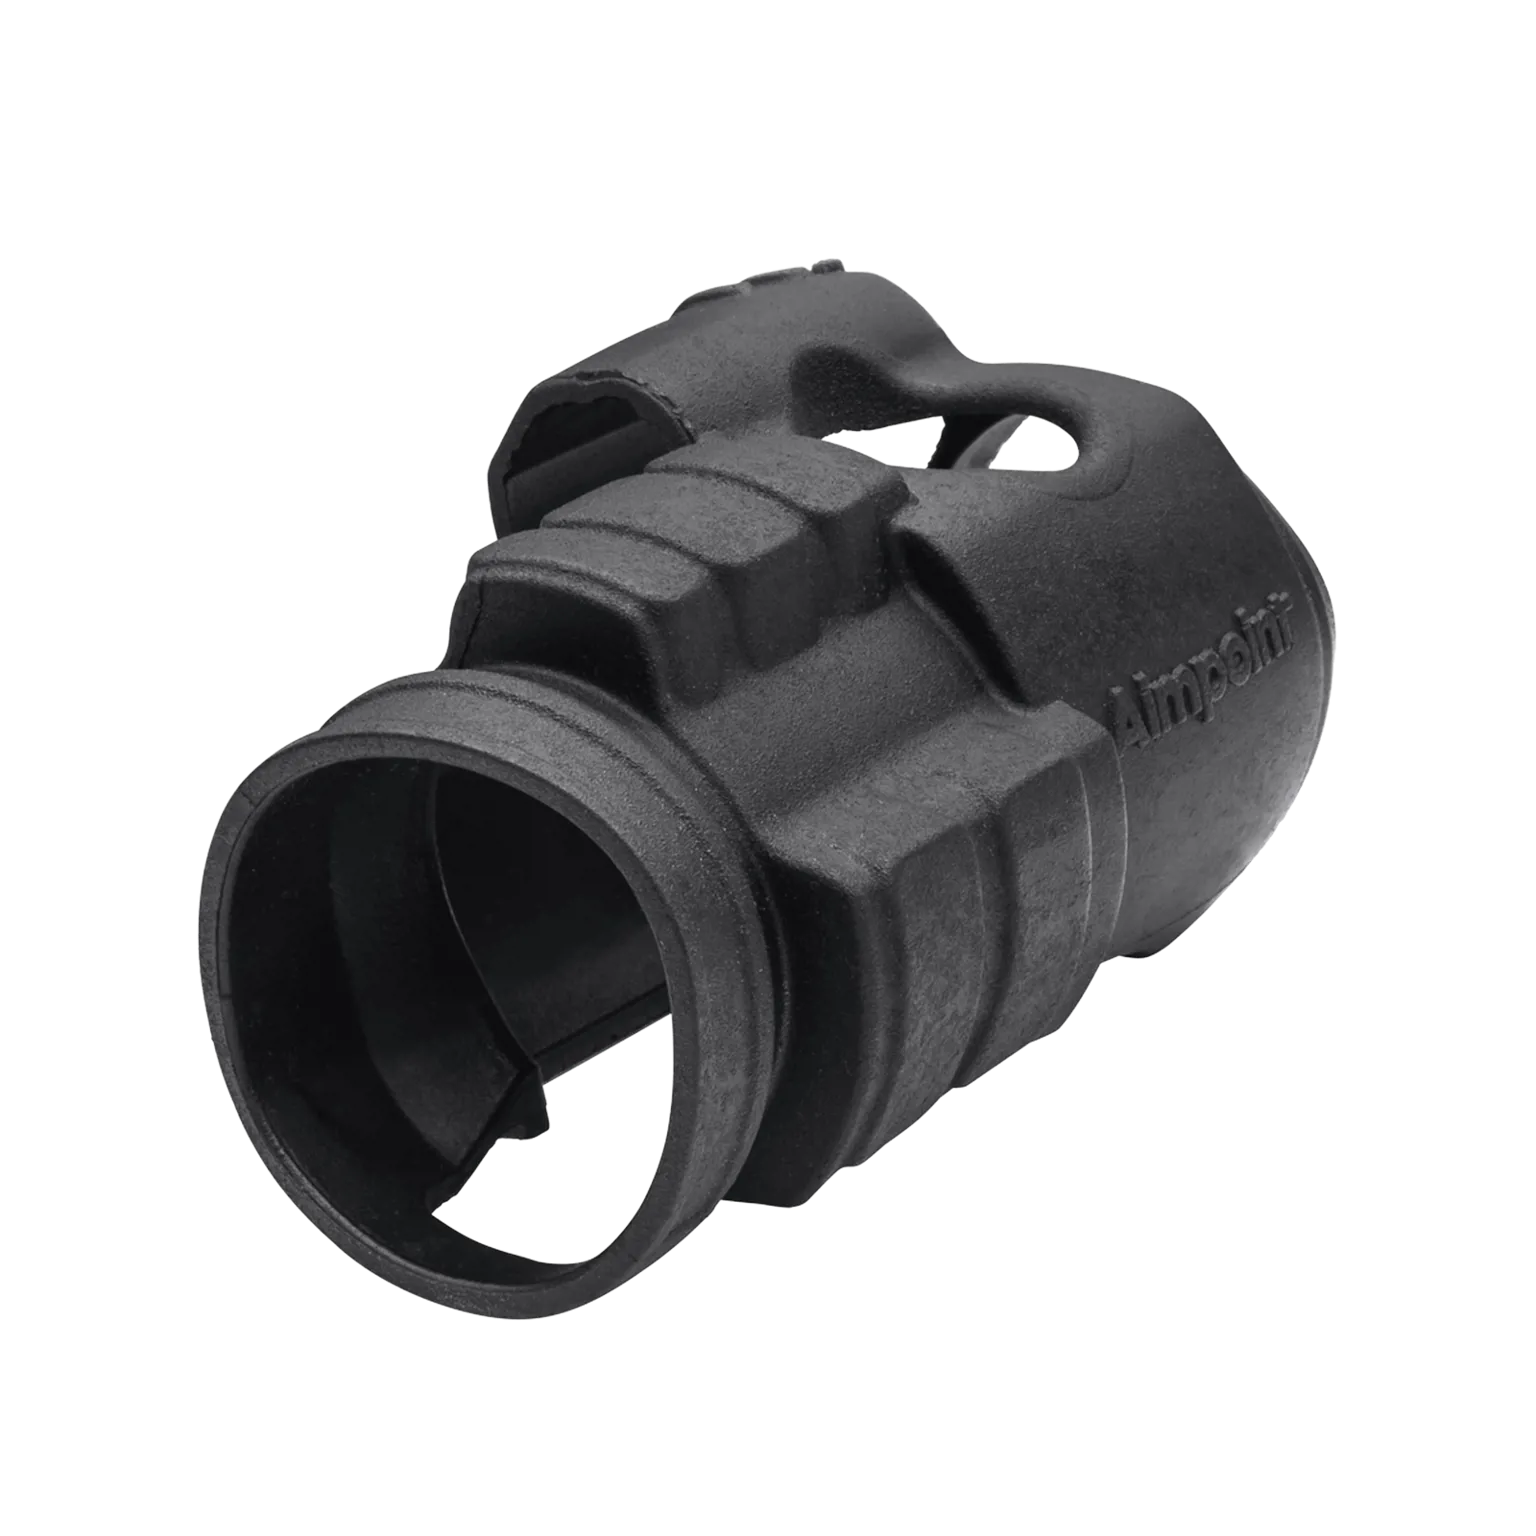 Outer rubber cover - Black for Aimpoint® CompM3/ML3  - 1